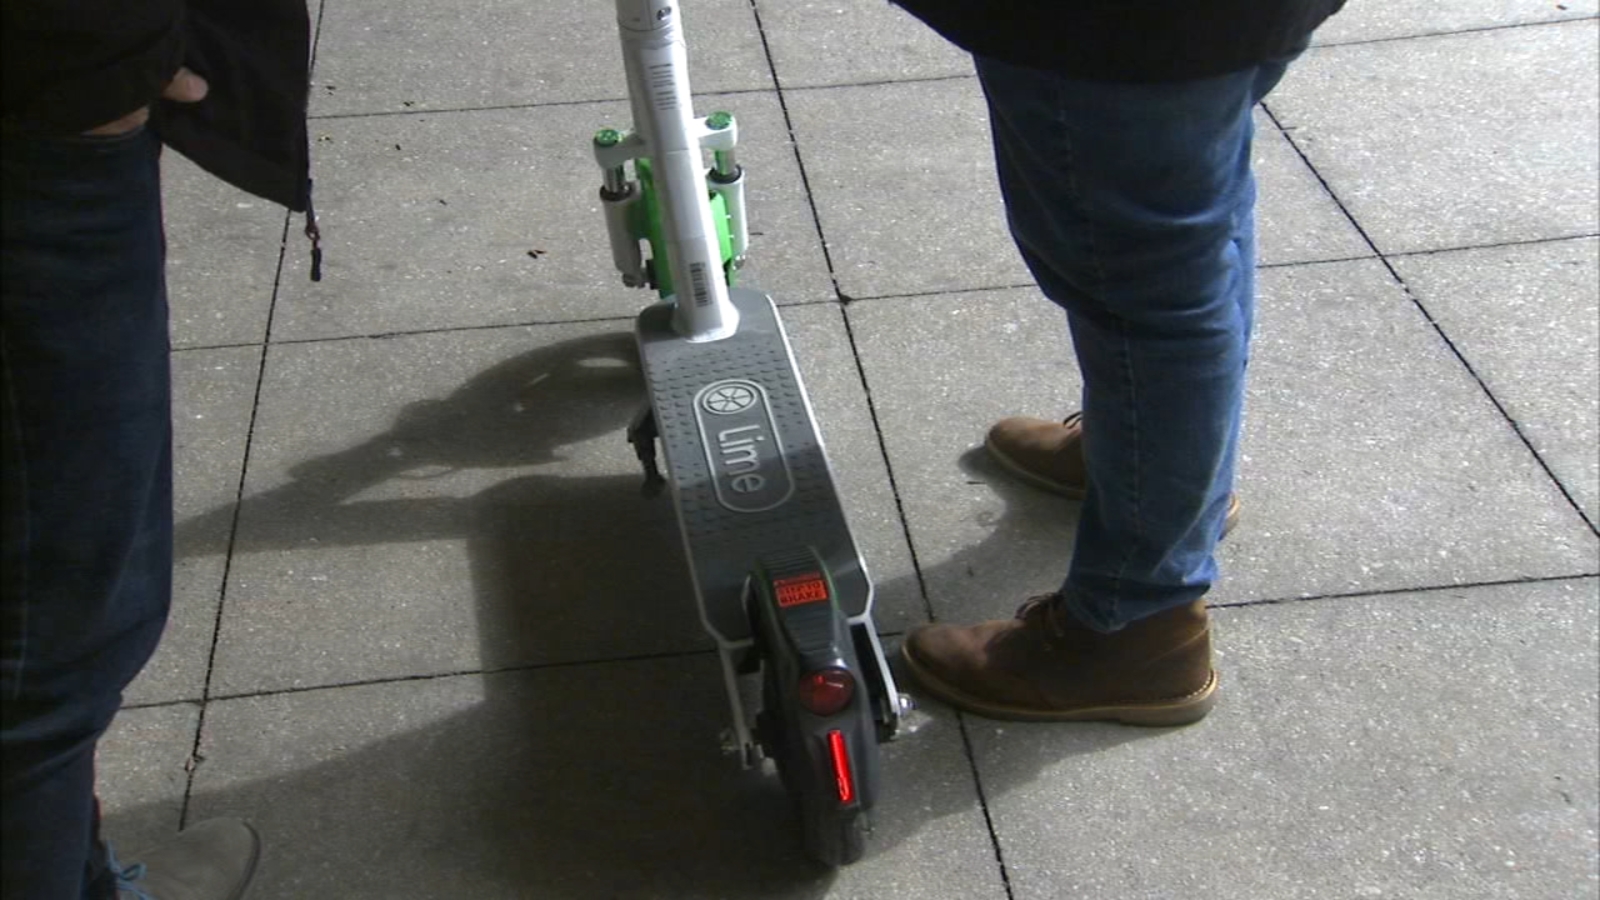 Mayor’s office reveals 3 electric scooter companies coming to Chicago next month